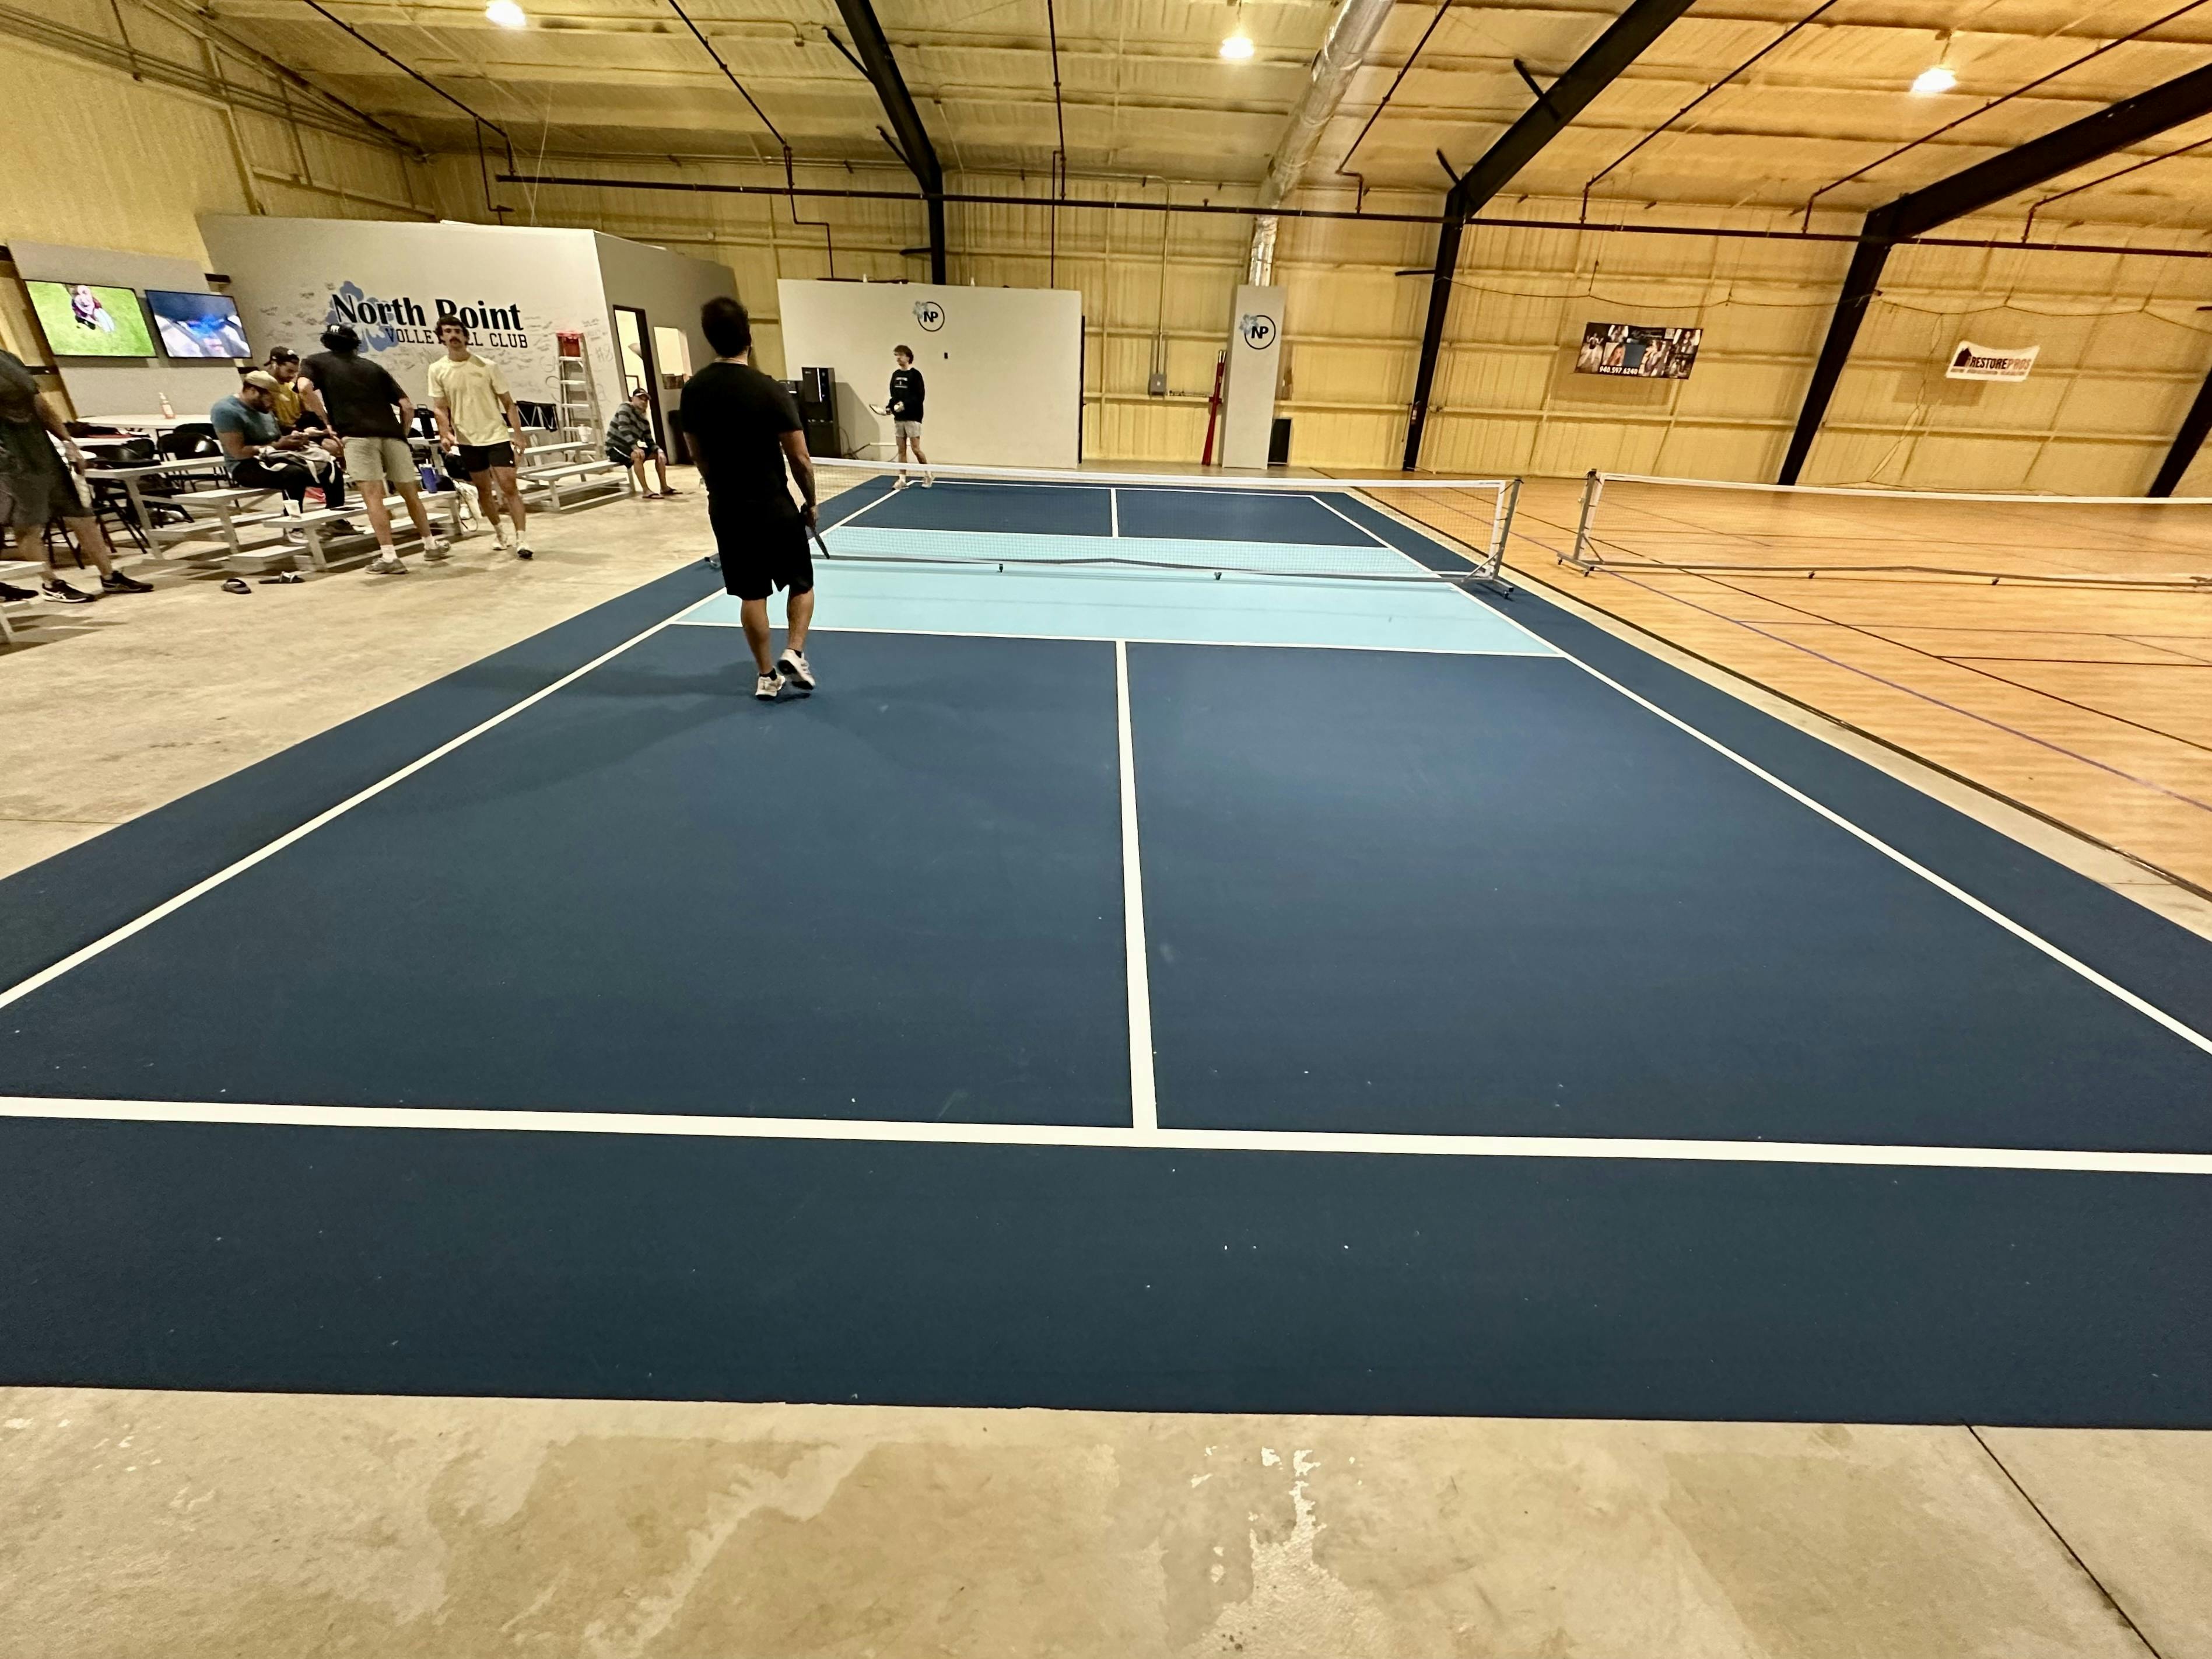 Image 5 of 8 of North Point Pickleball Club court